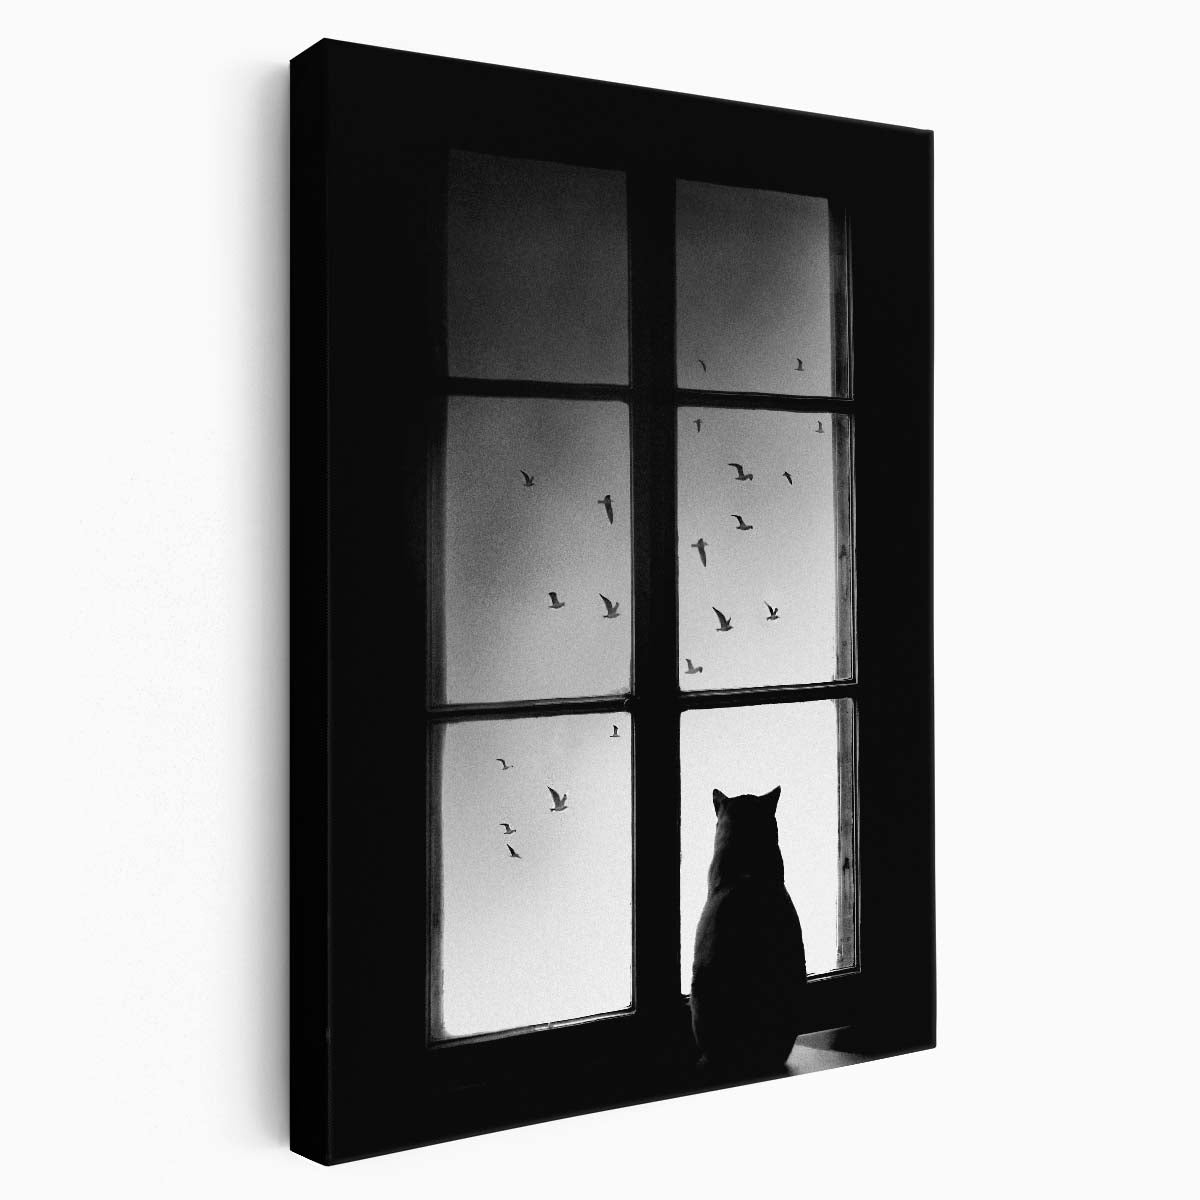 Monochrome Cat Observing Birds Migration Photography Art by Luxuriance Designs, made in USA